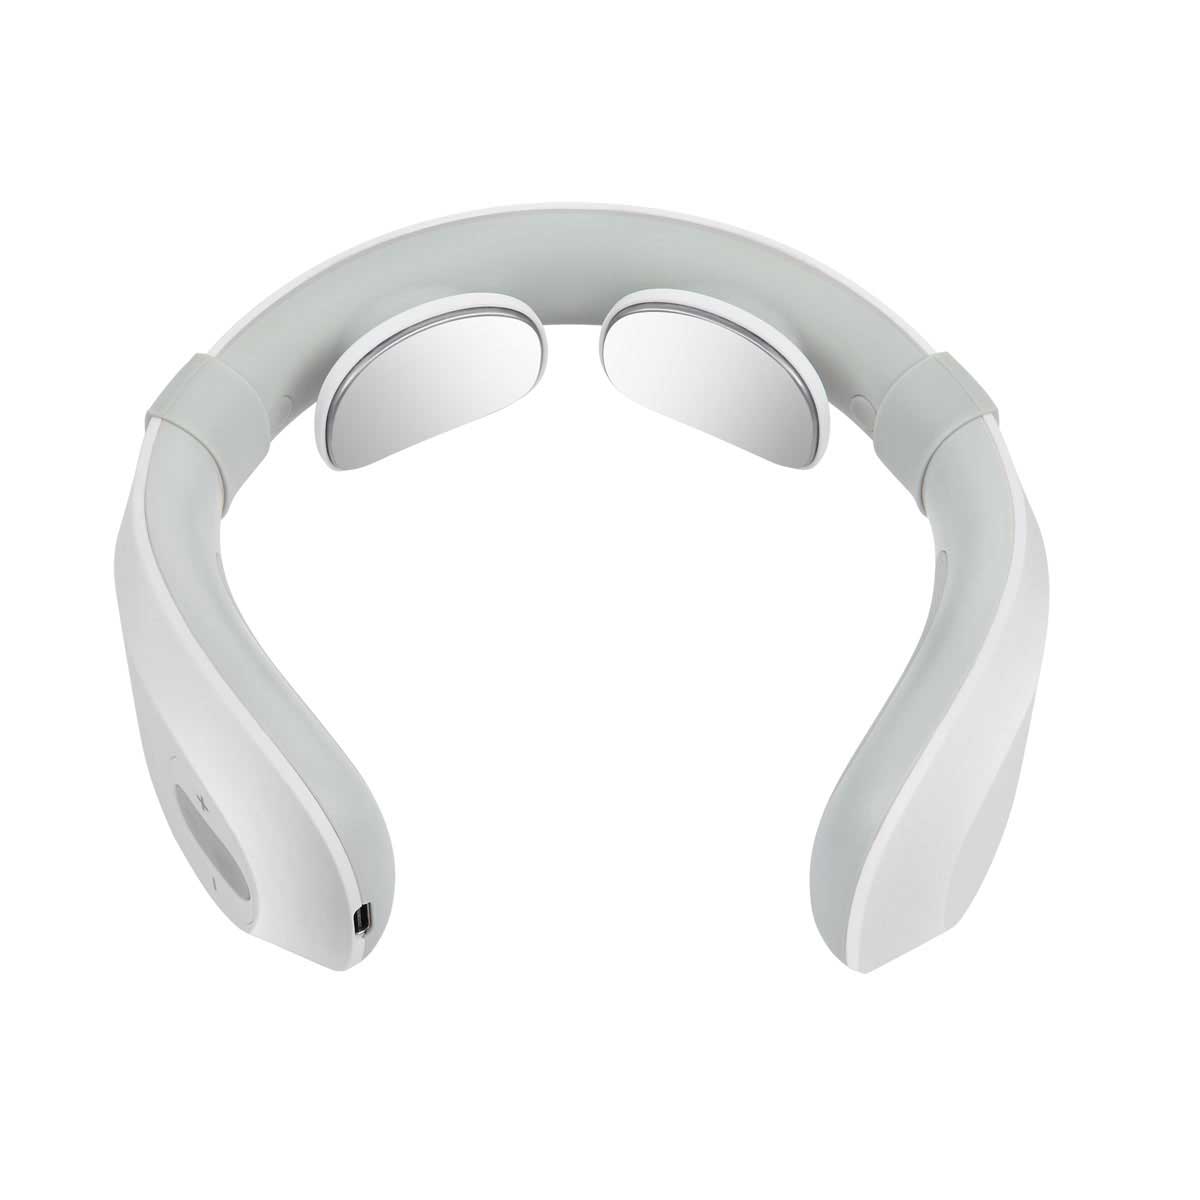 Noova Intelligent Neck Massager with Heat for Neck Pain Relief